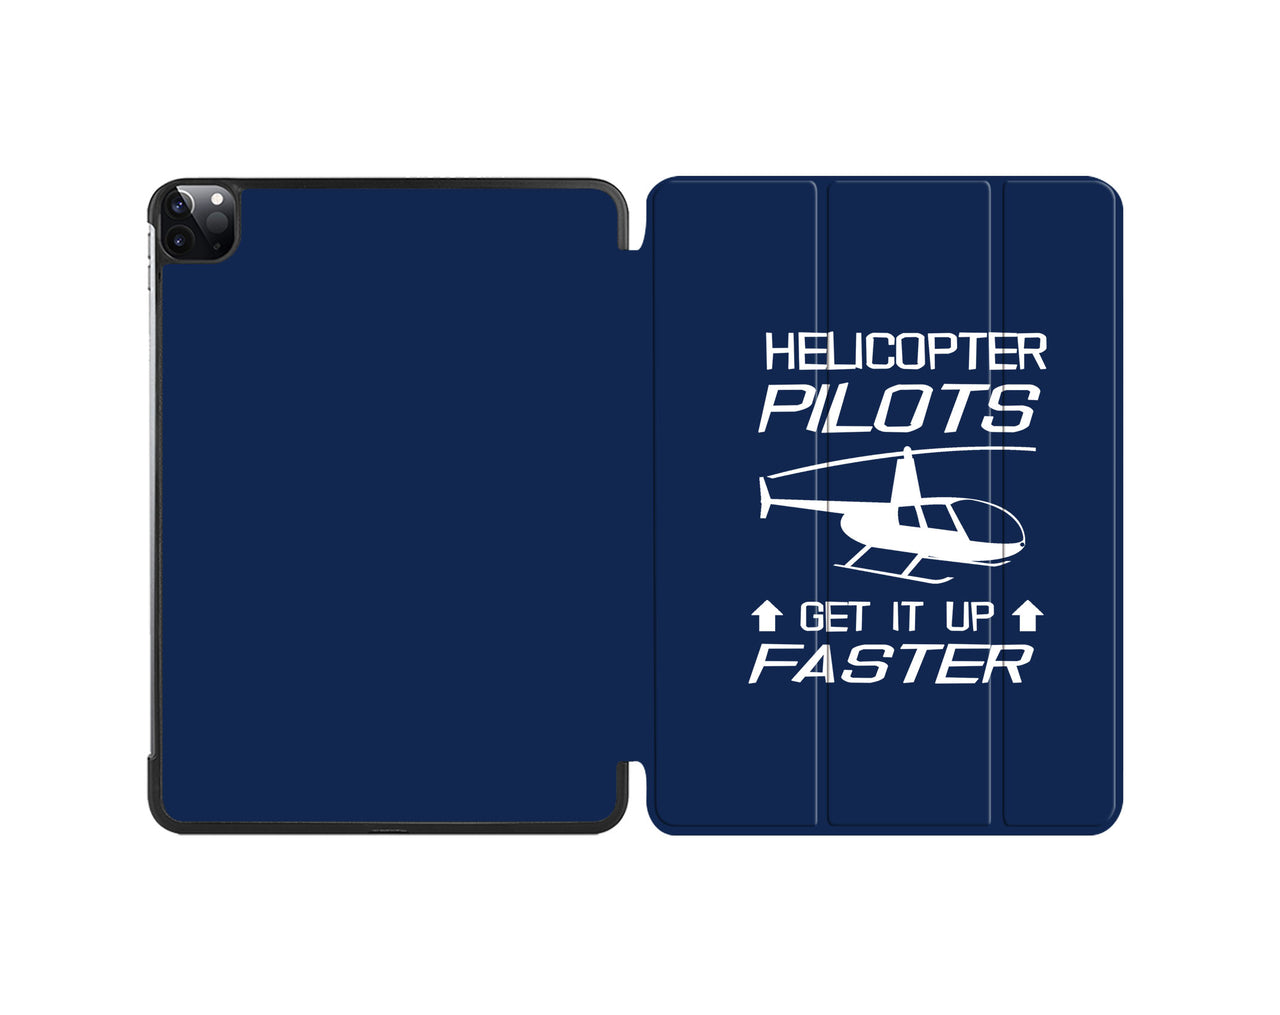 Helicopter Pilots Get It Up Faster Designed iPad Cases